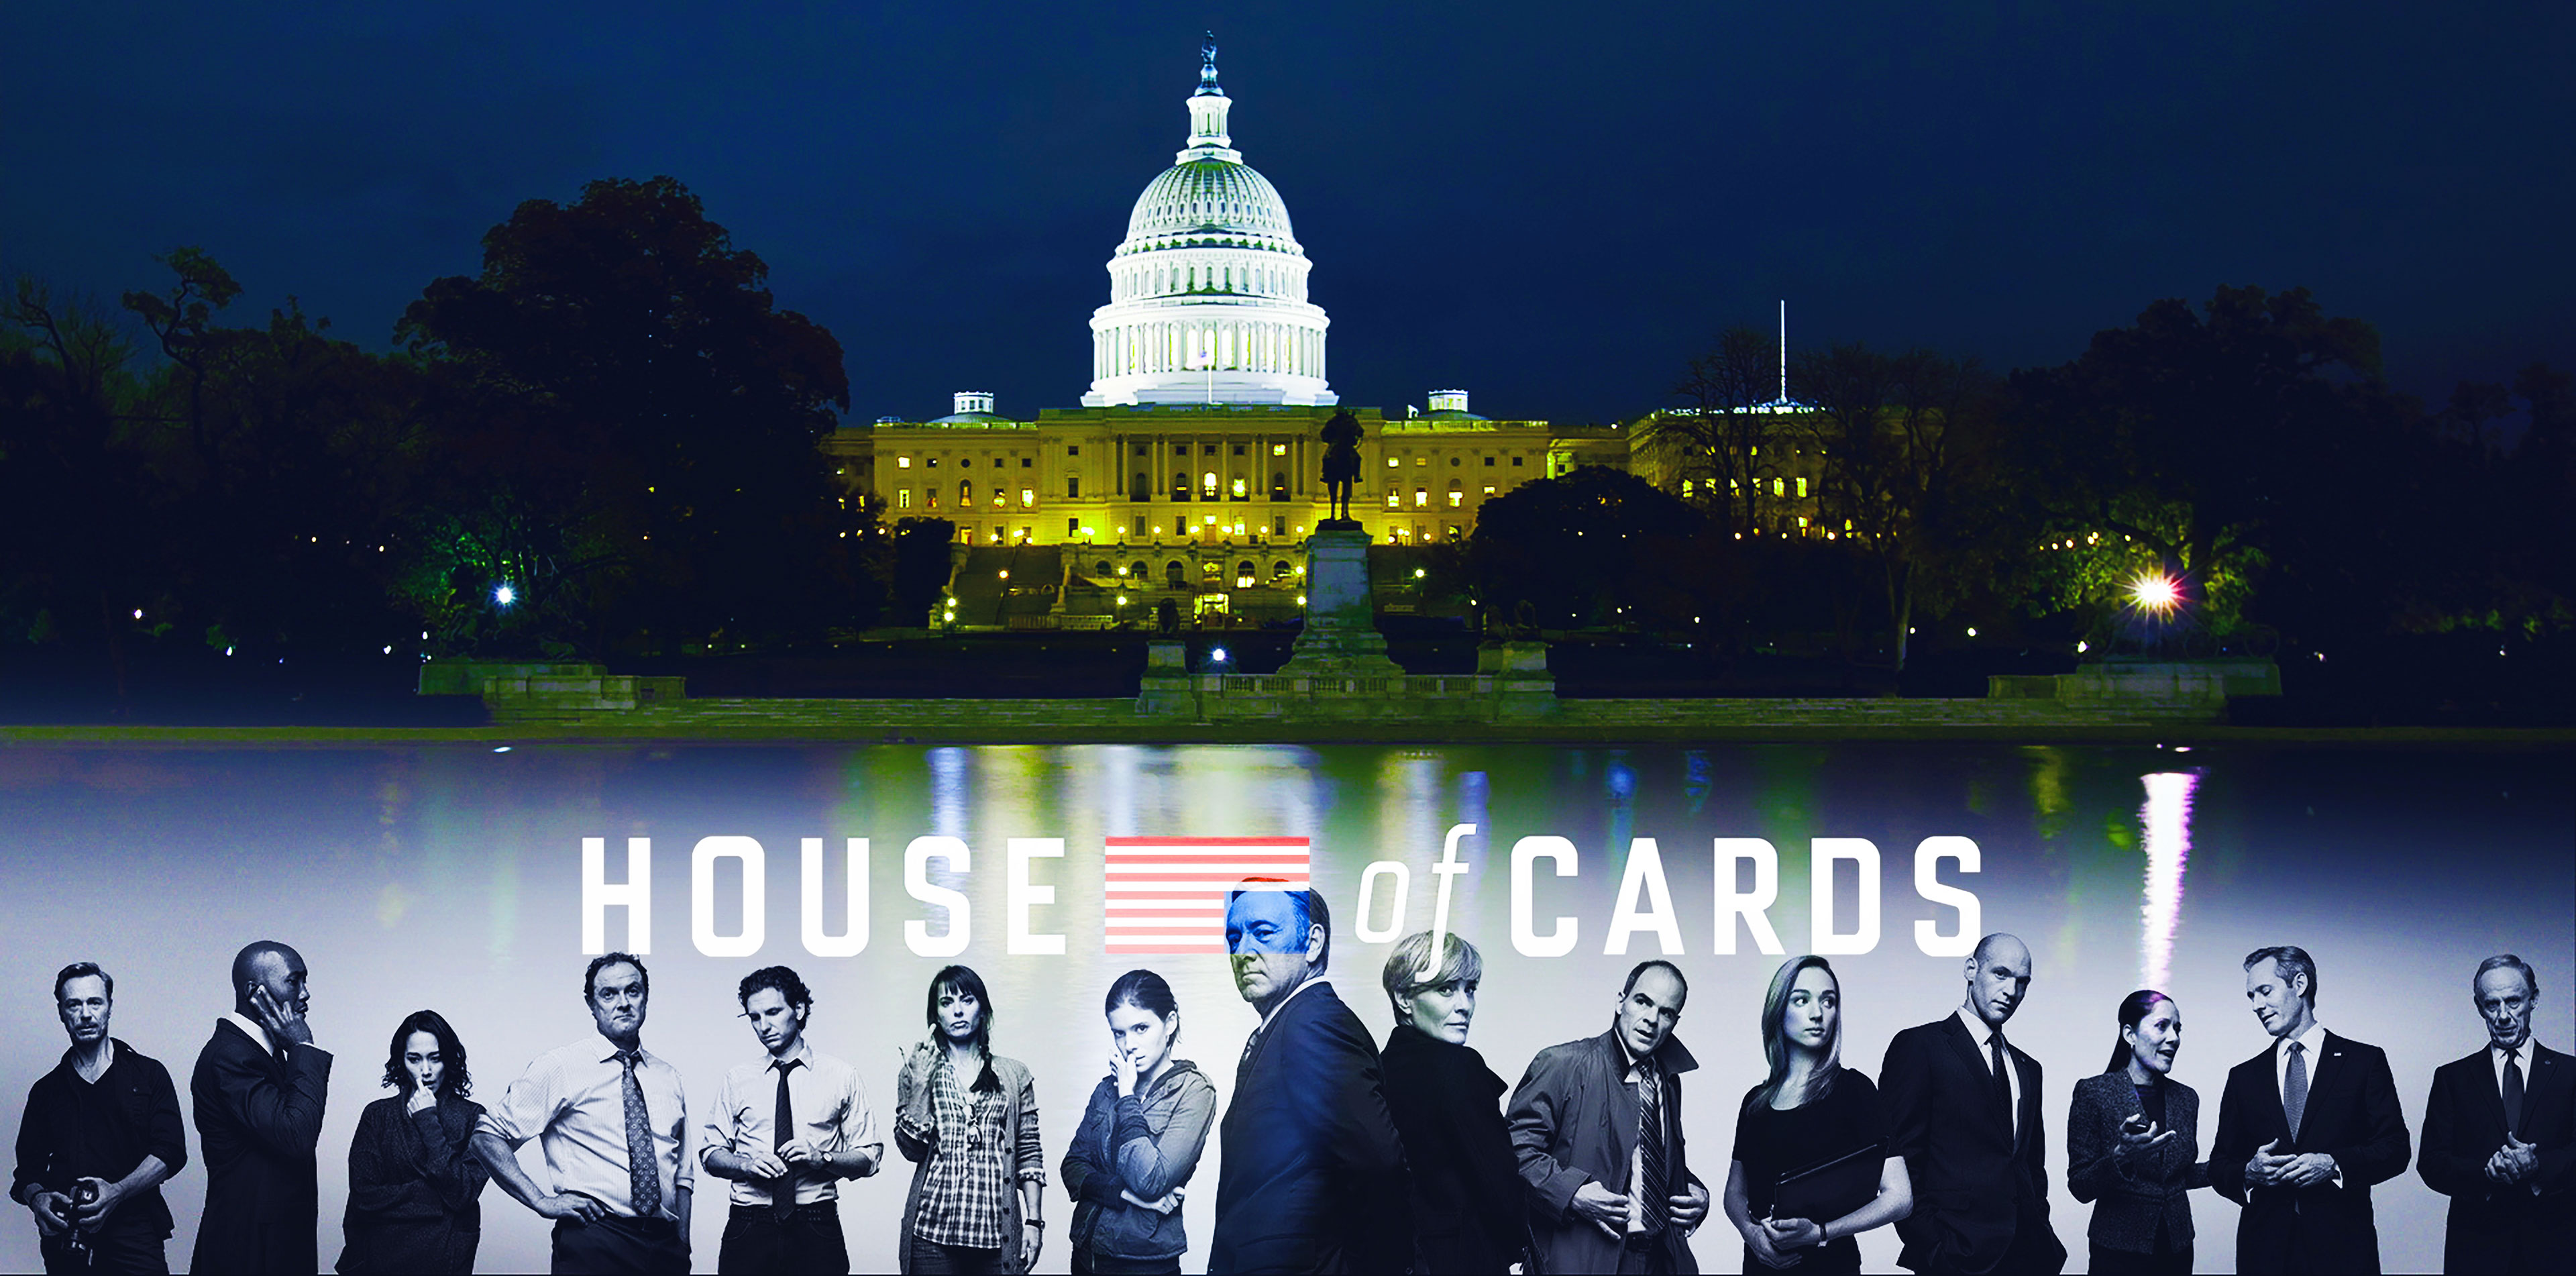 House Of Cards Wallpaper - United States Capitol - HD Wallpaper 